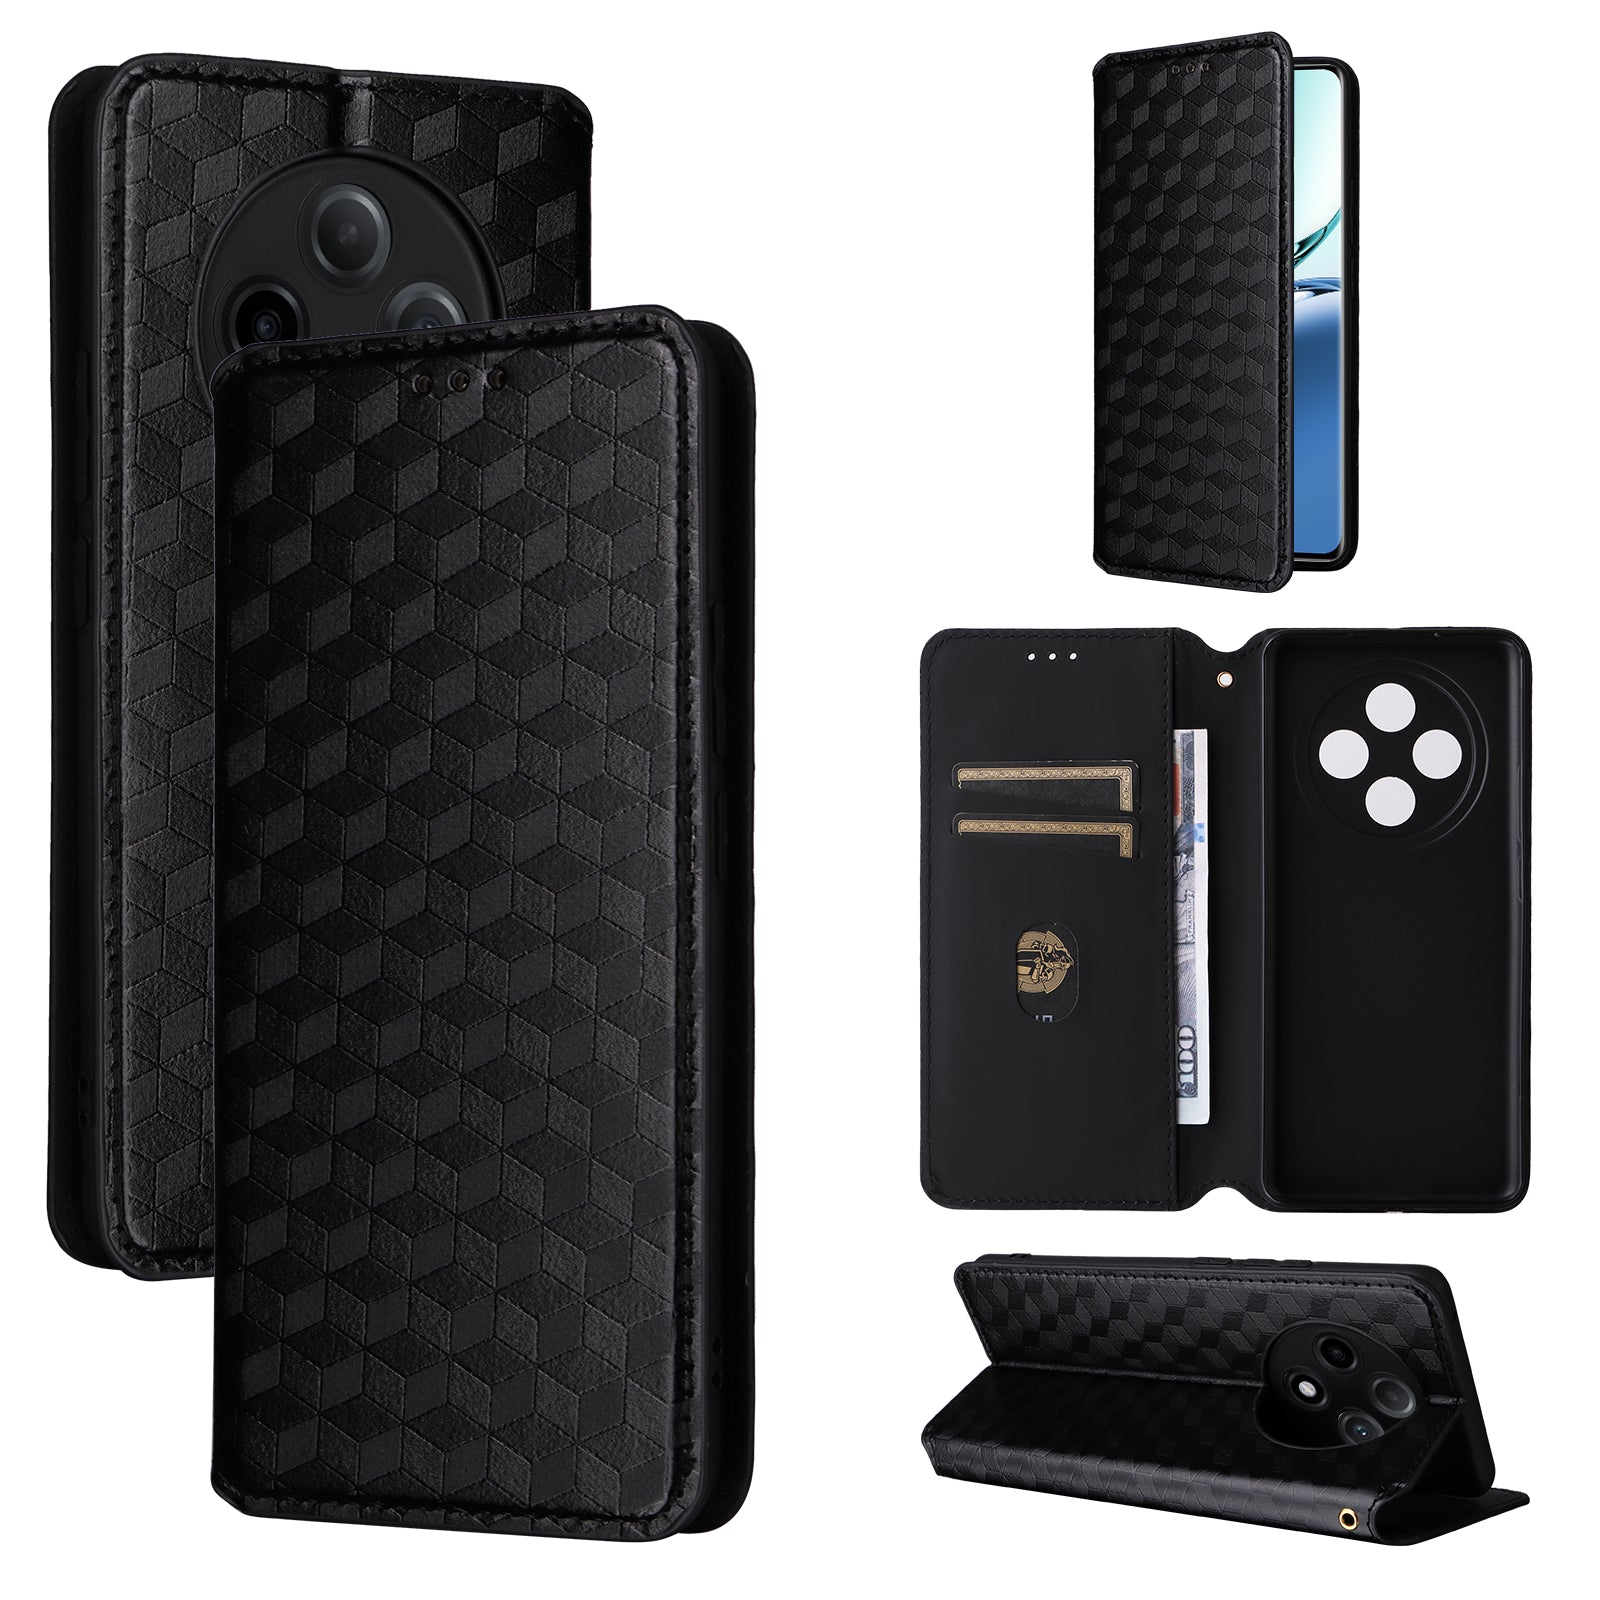 For Oppo A3 Pro 5G Leather Wallet Flip Cover Mobile Phone Case Wholesale - Black